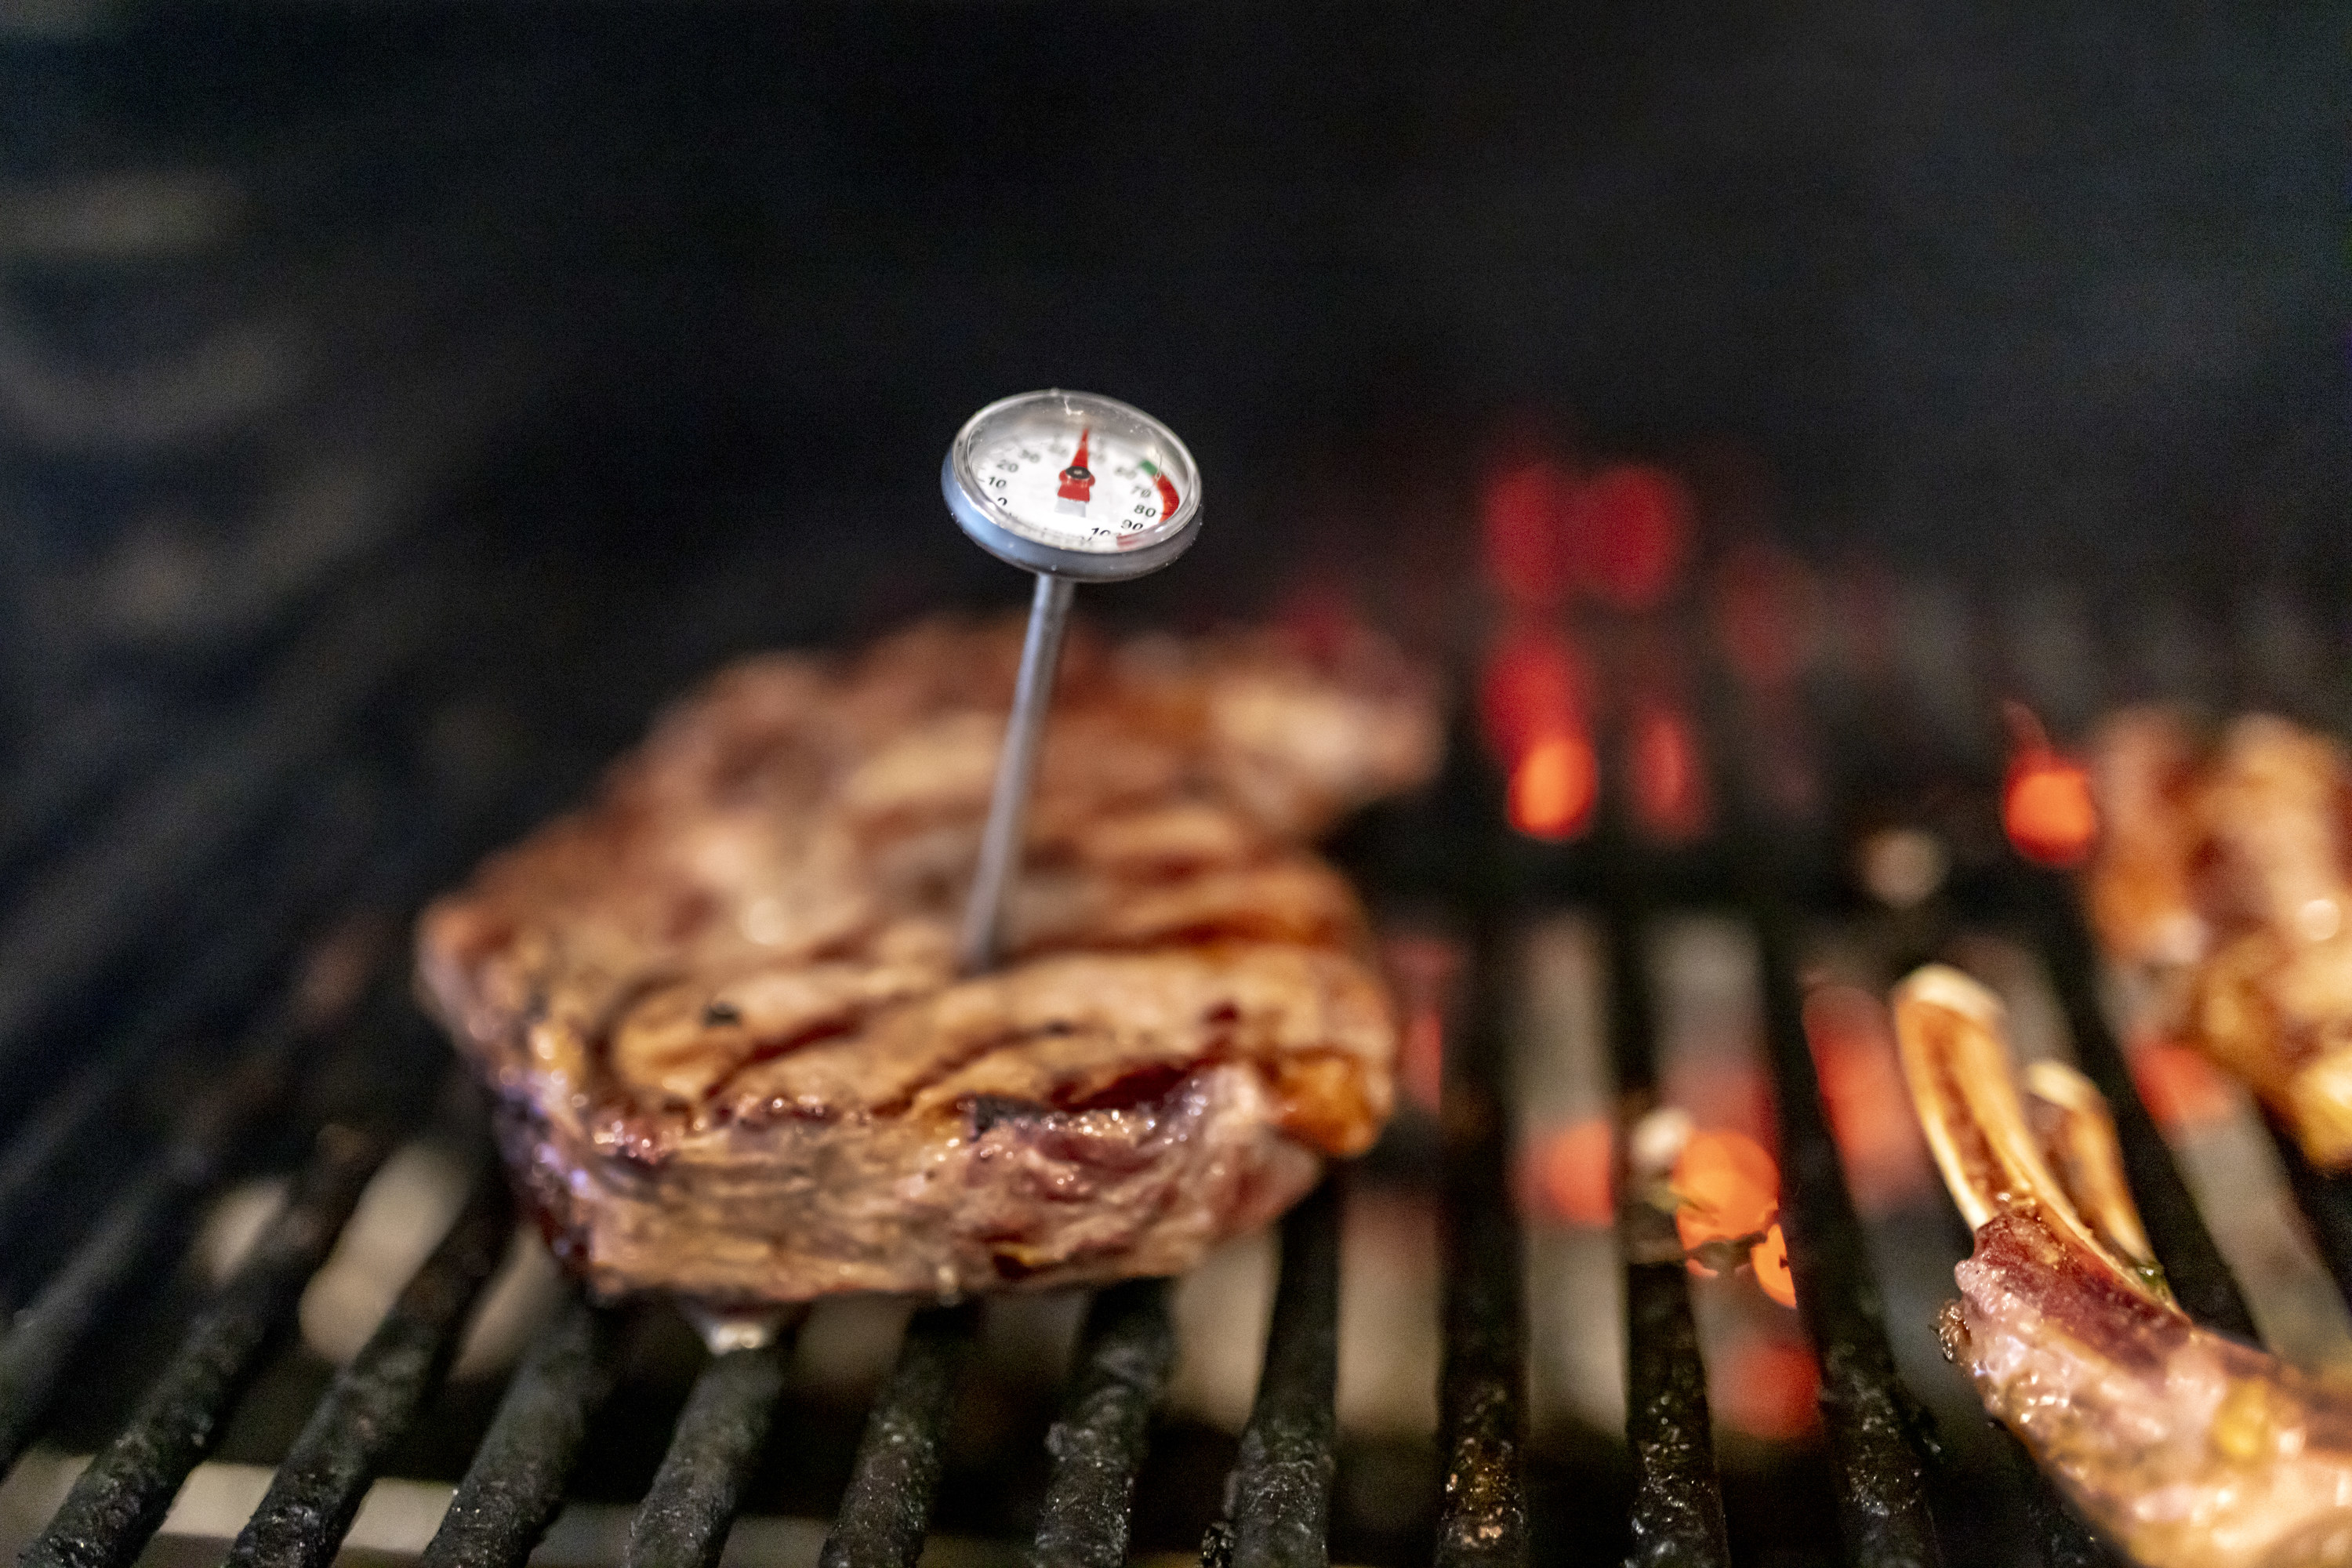 Meat thermometer stuck into a large steak on the grill